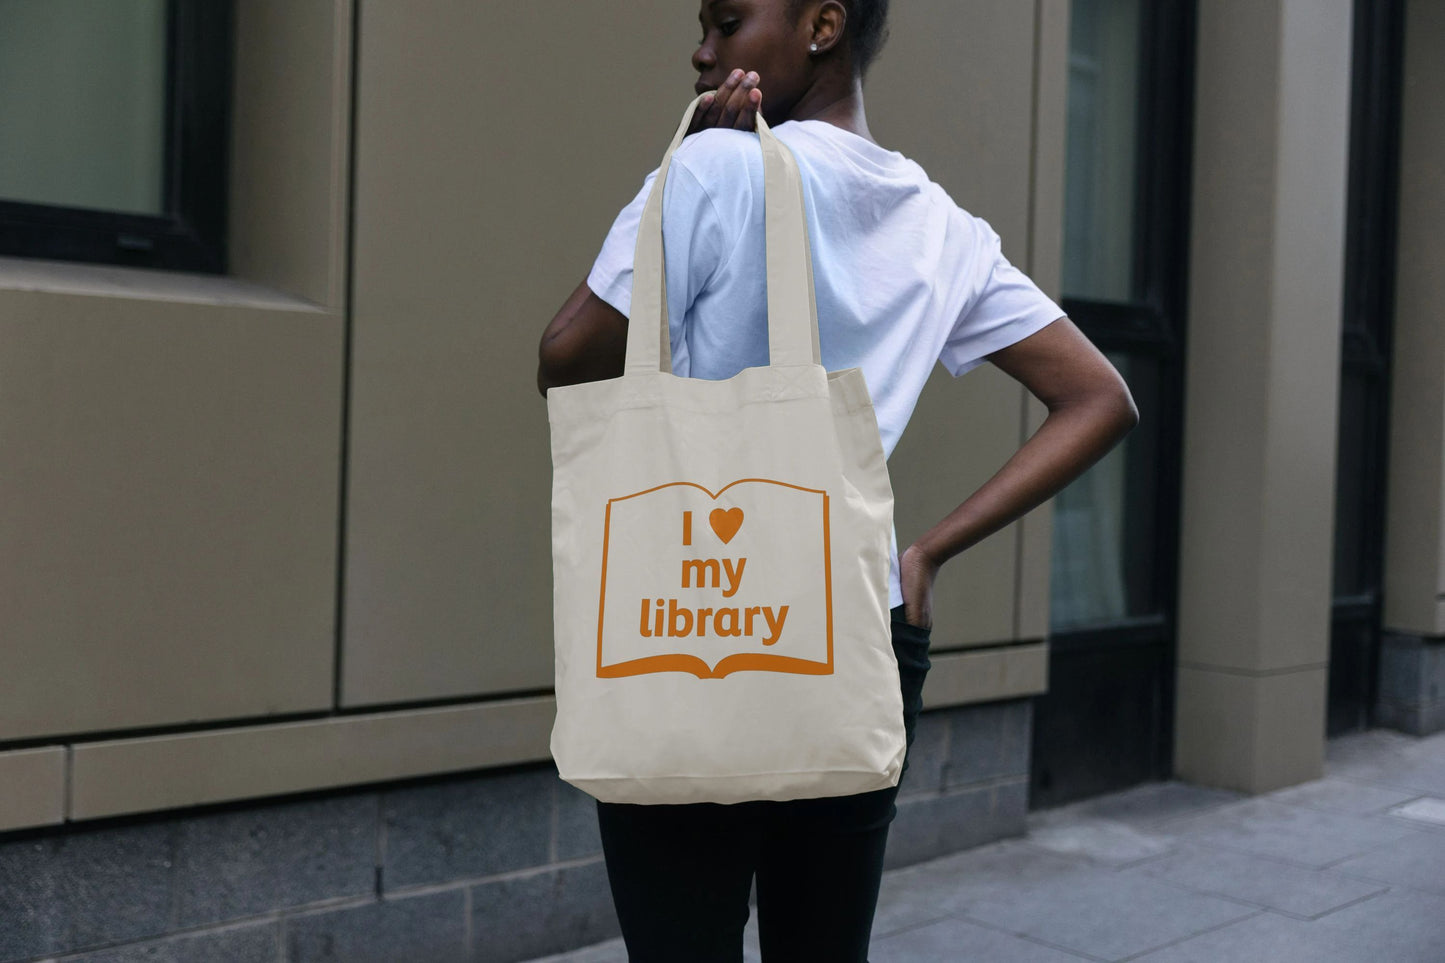 'I love my library' tote bag